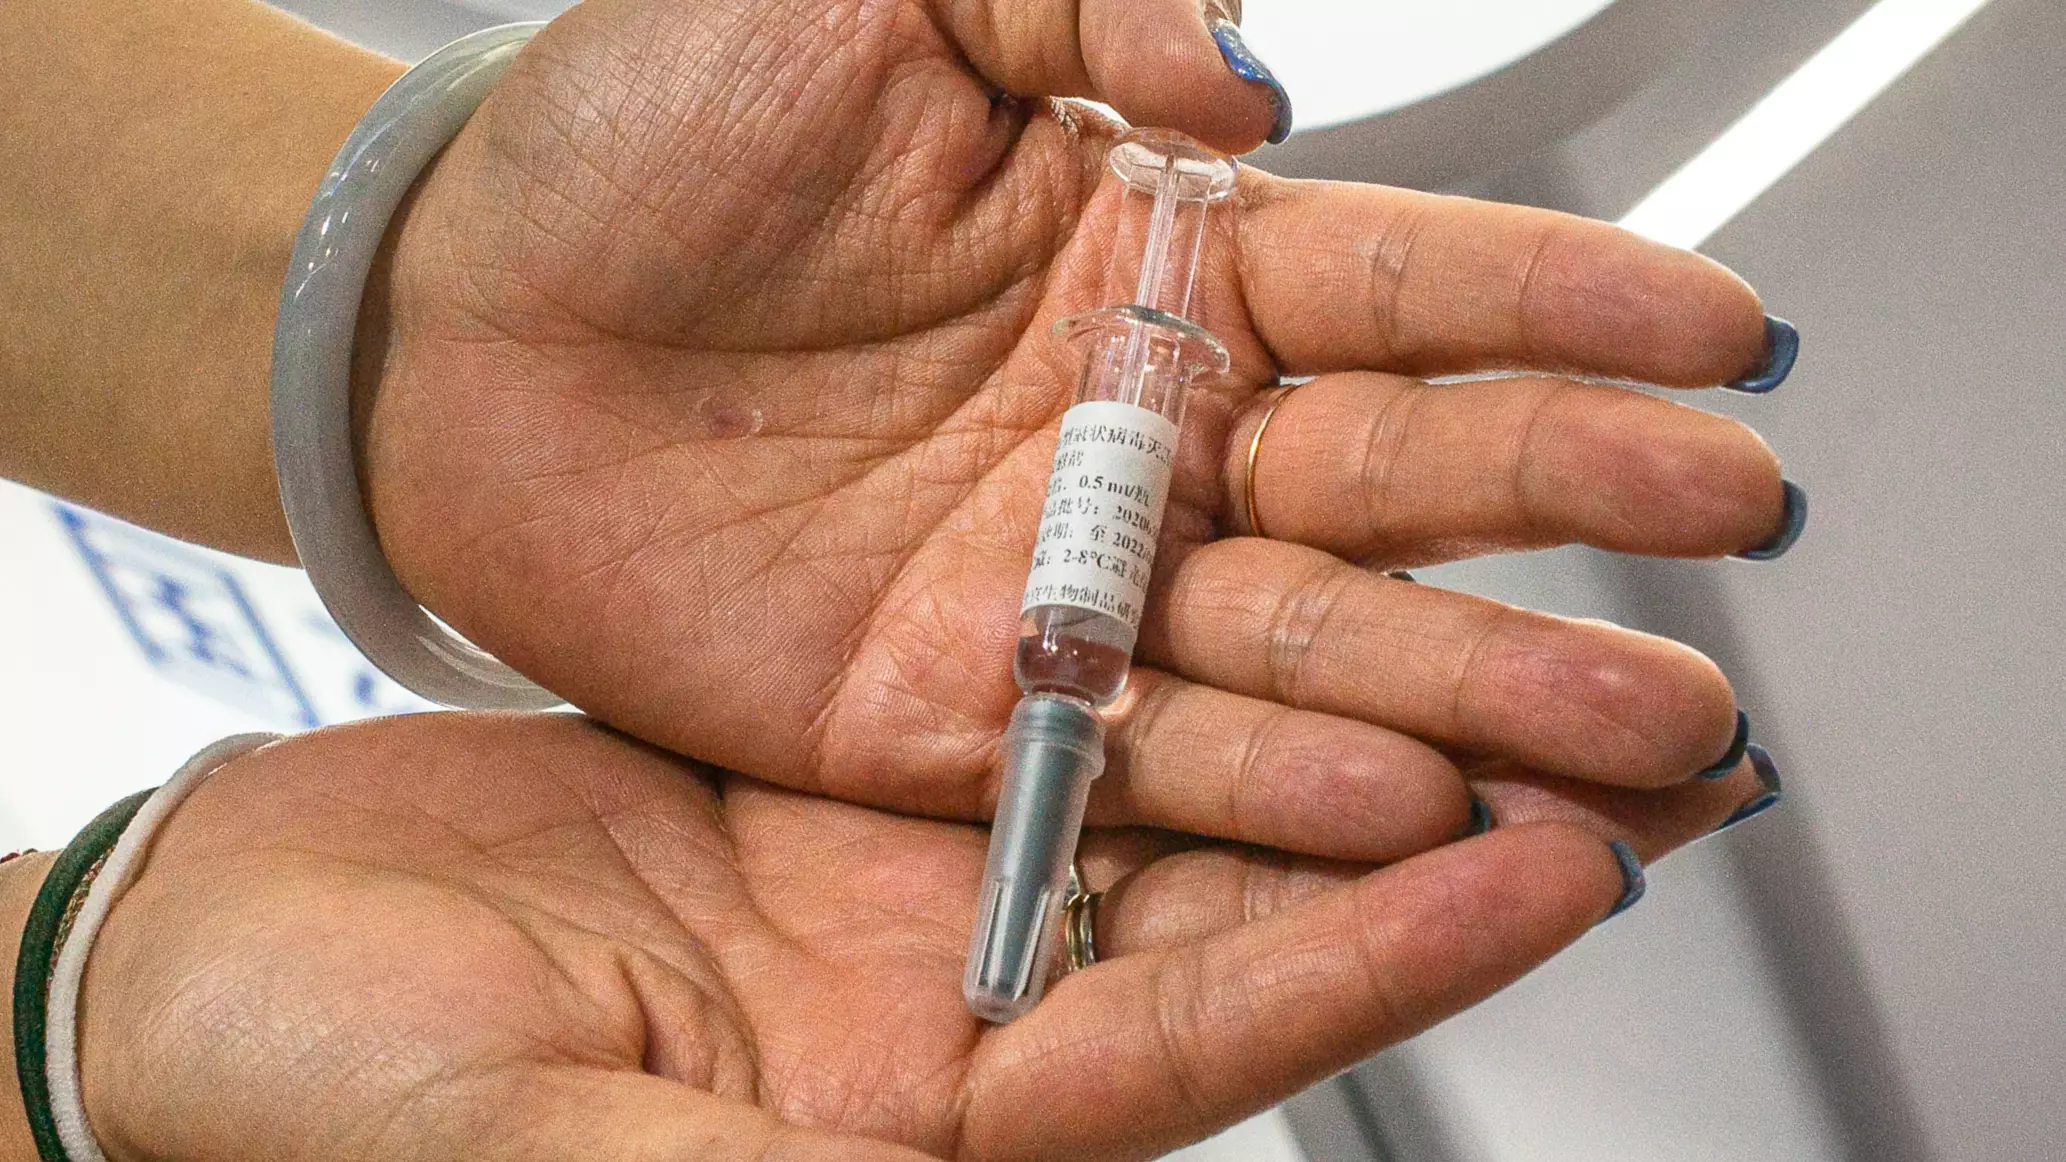 Coronavirus Vaccine Trial Put On Hold After Patient Developed An 'Unexplained Illness'